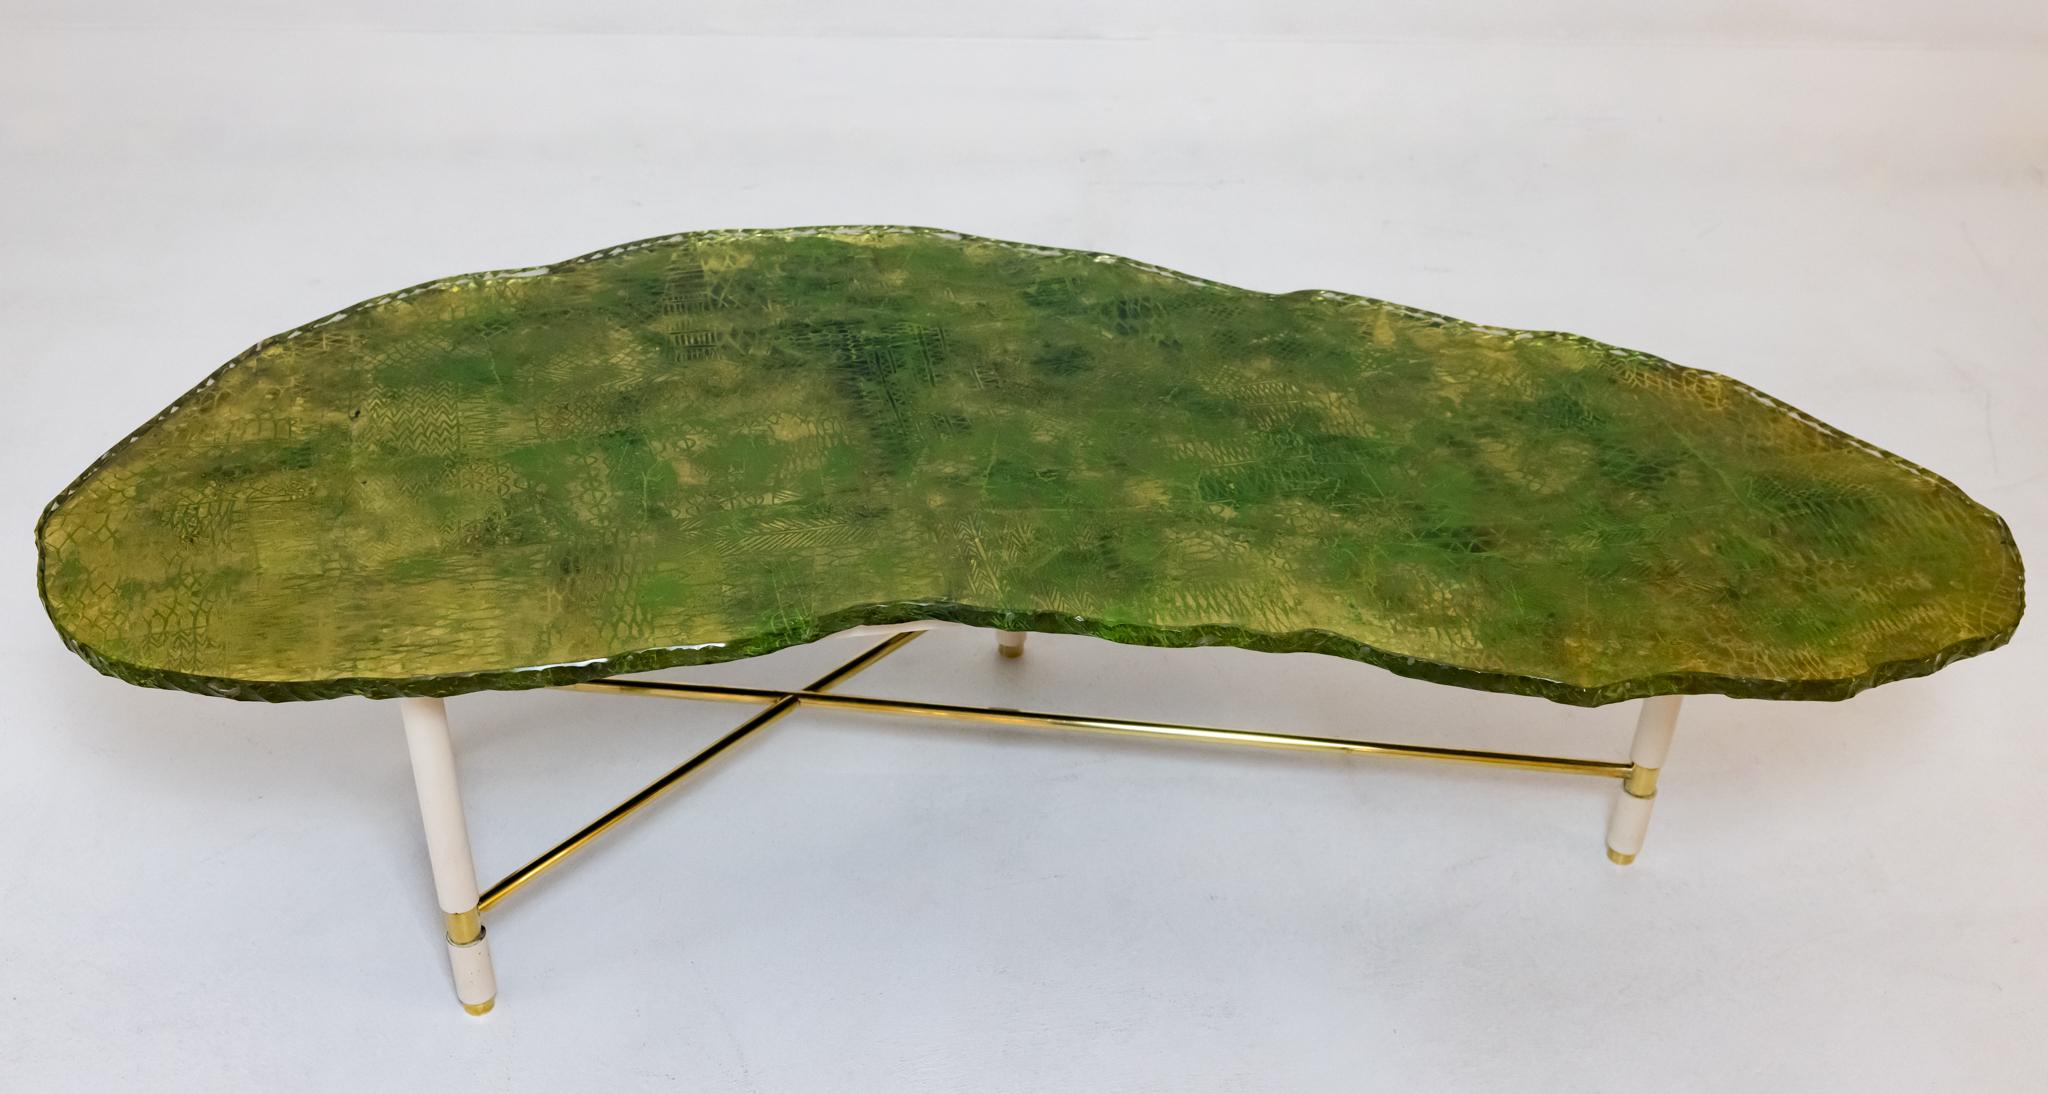 A rare find. This table with original Brass and painted wood base, was produced by Fontana Arte around 1953 in Italy. The table features a free form glass top with a chipped edge. The glass has been painted by Dulio Barnabe under the name Dubè. Dubè